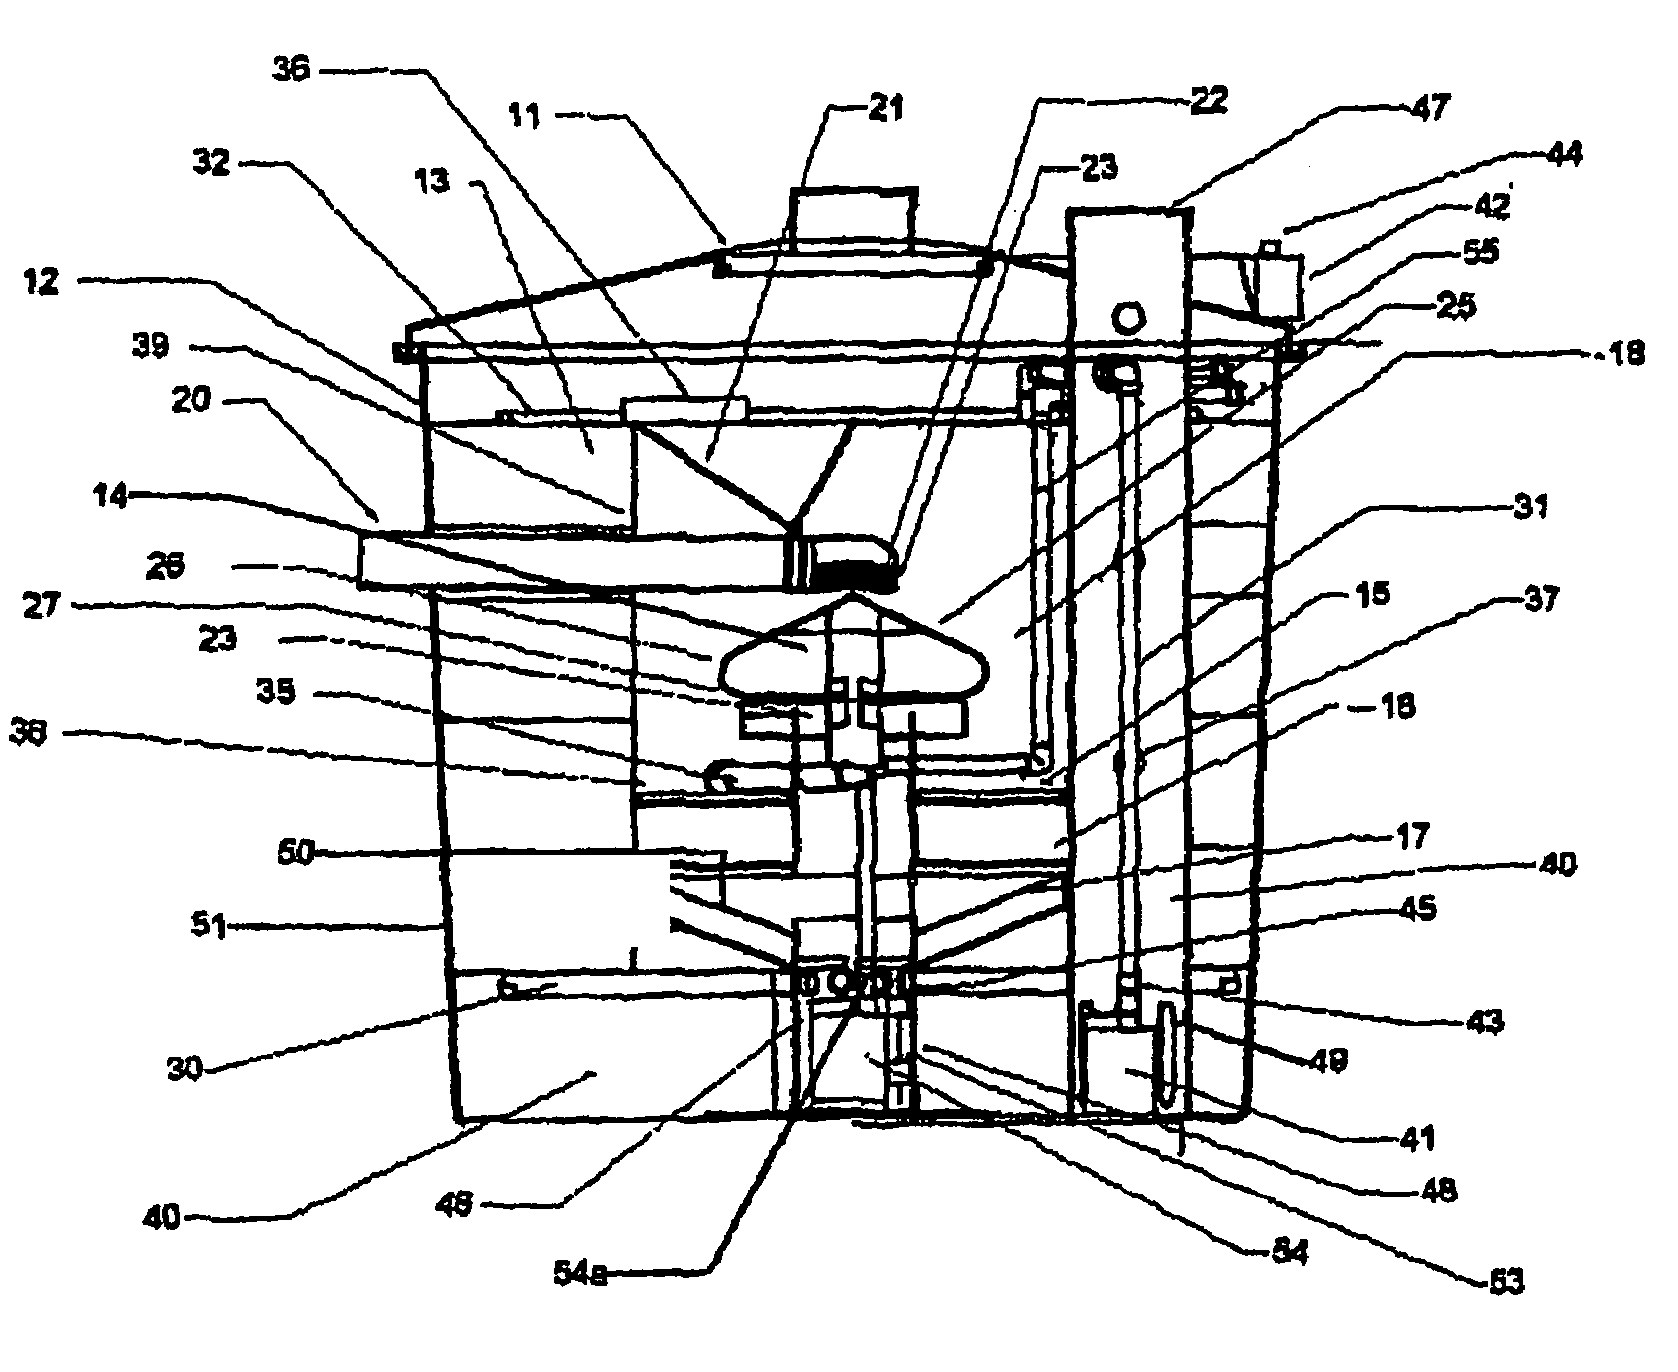 Apparatus and method for the treatment of waste